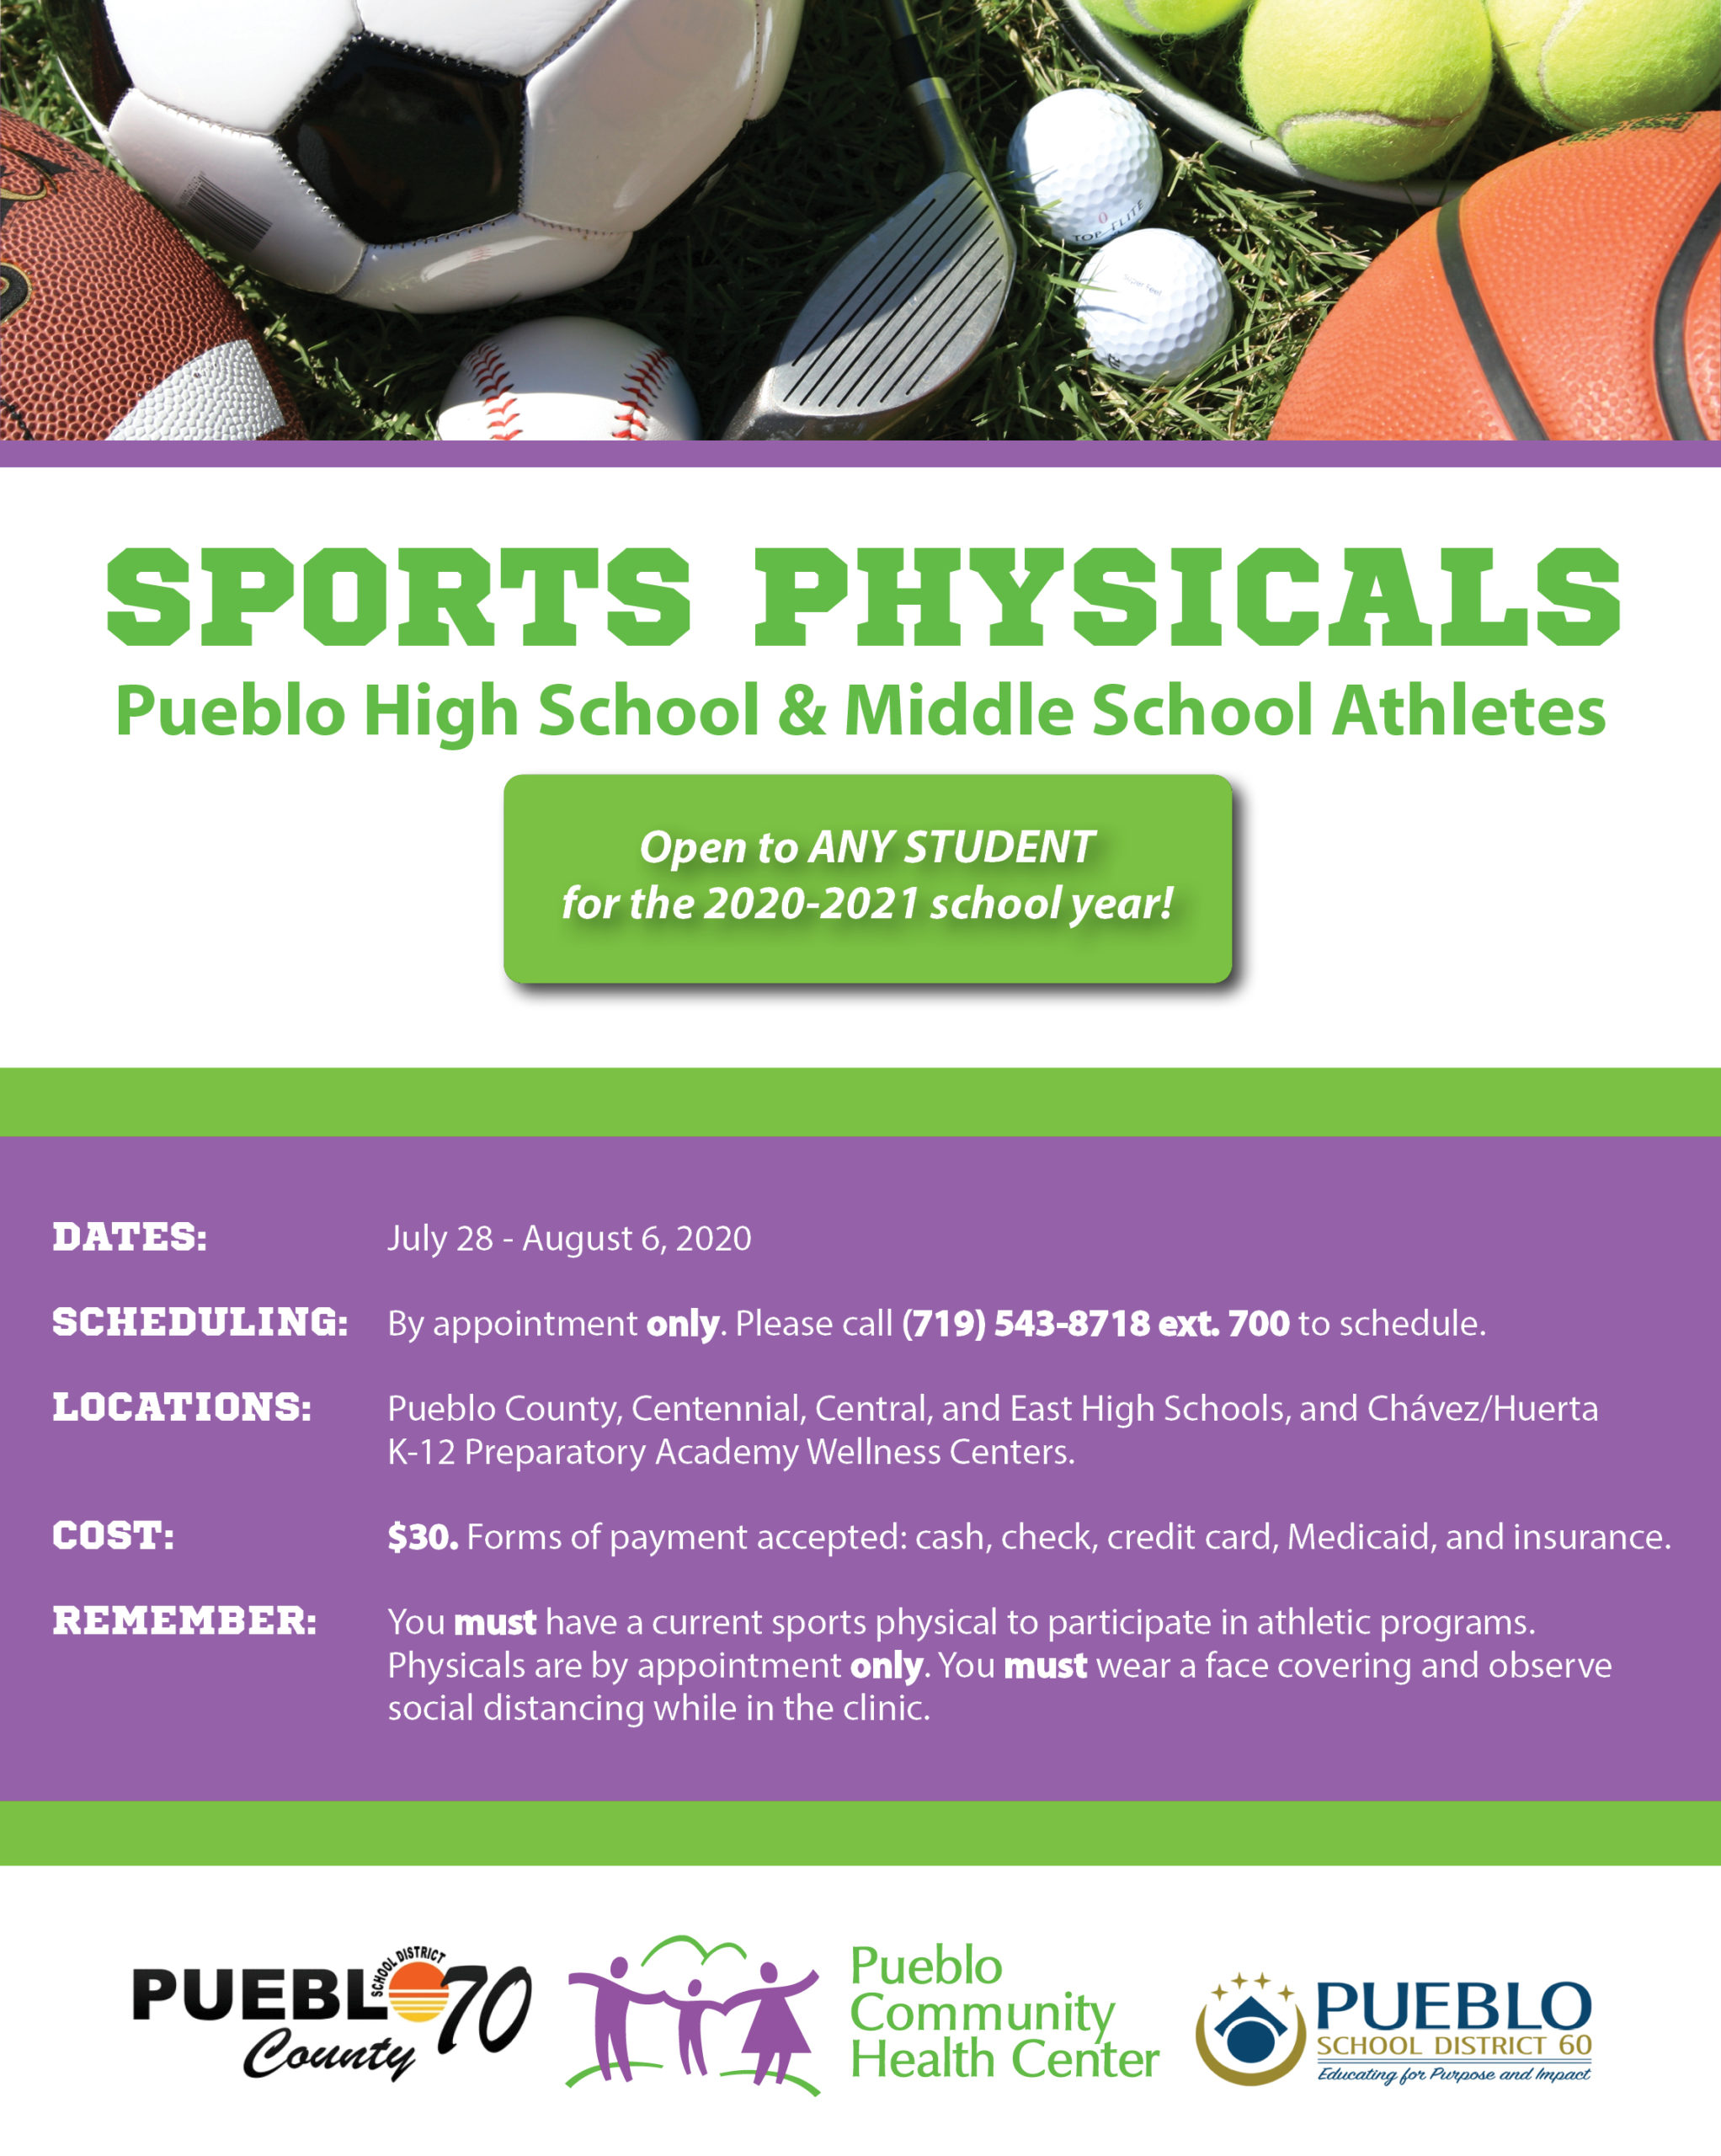 Sports Physicals flyer